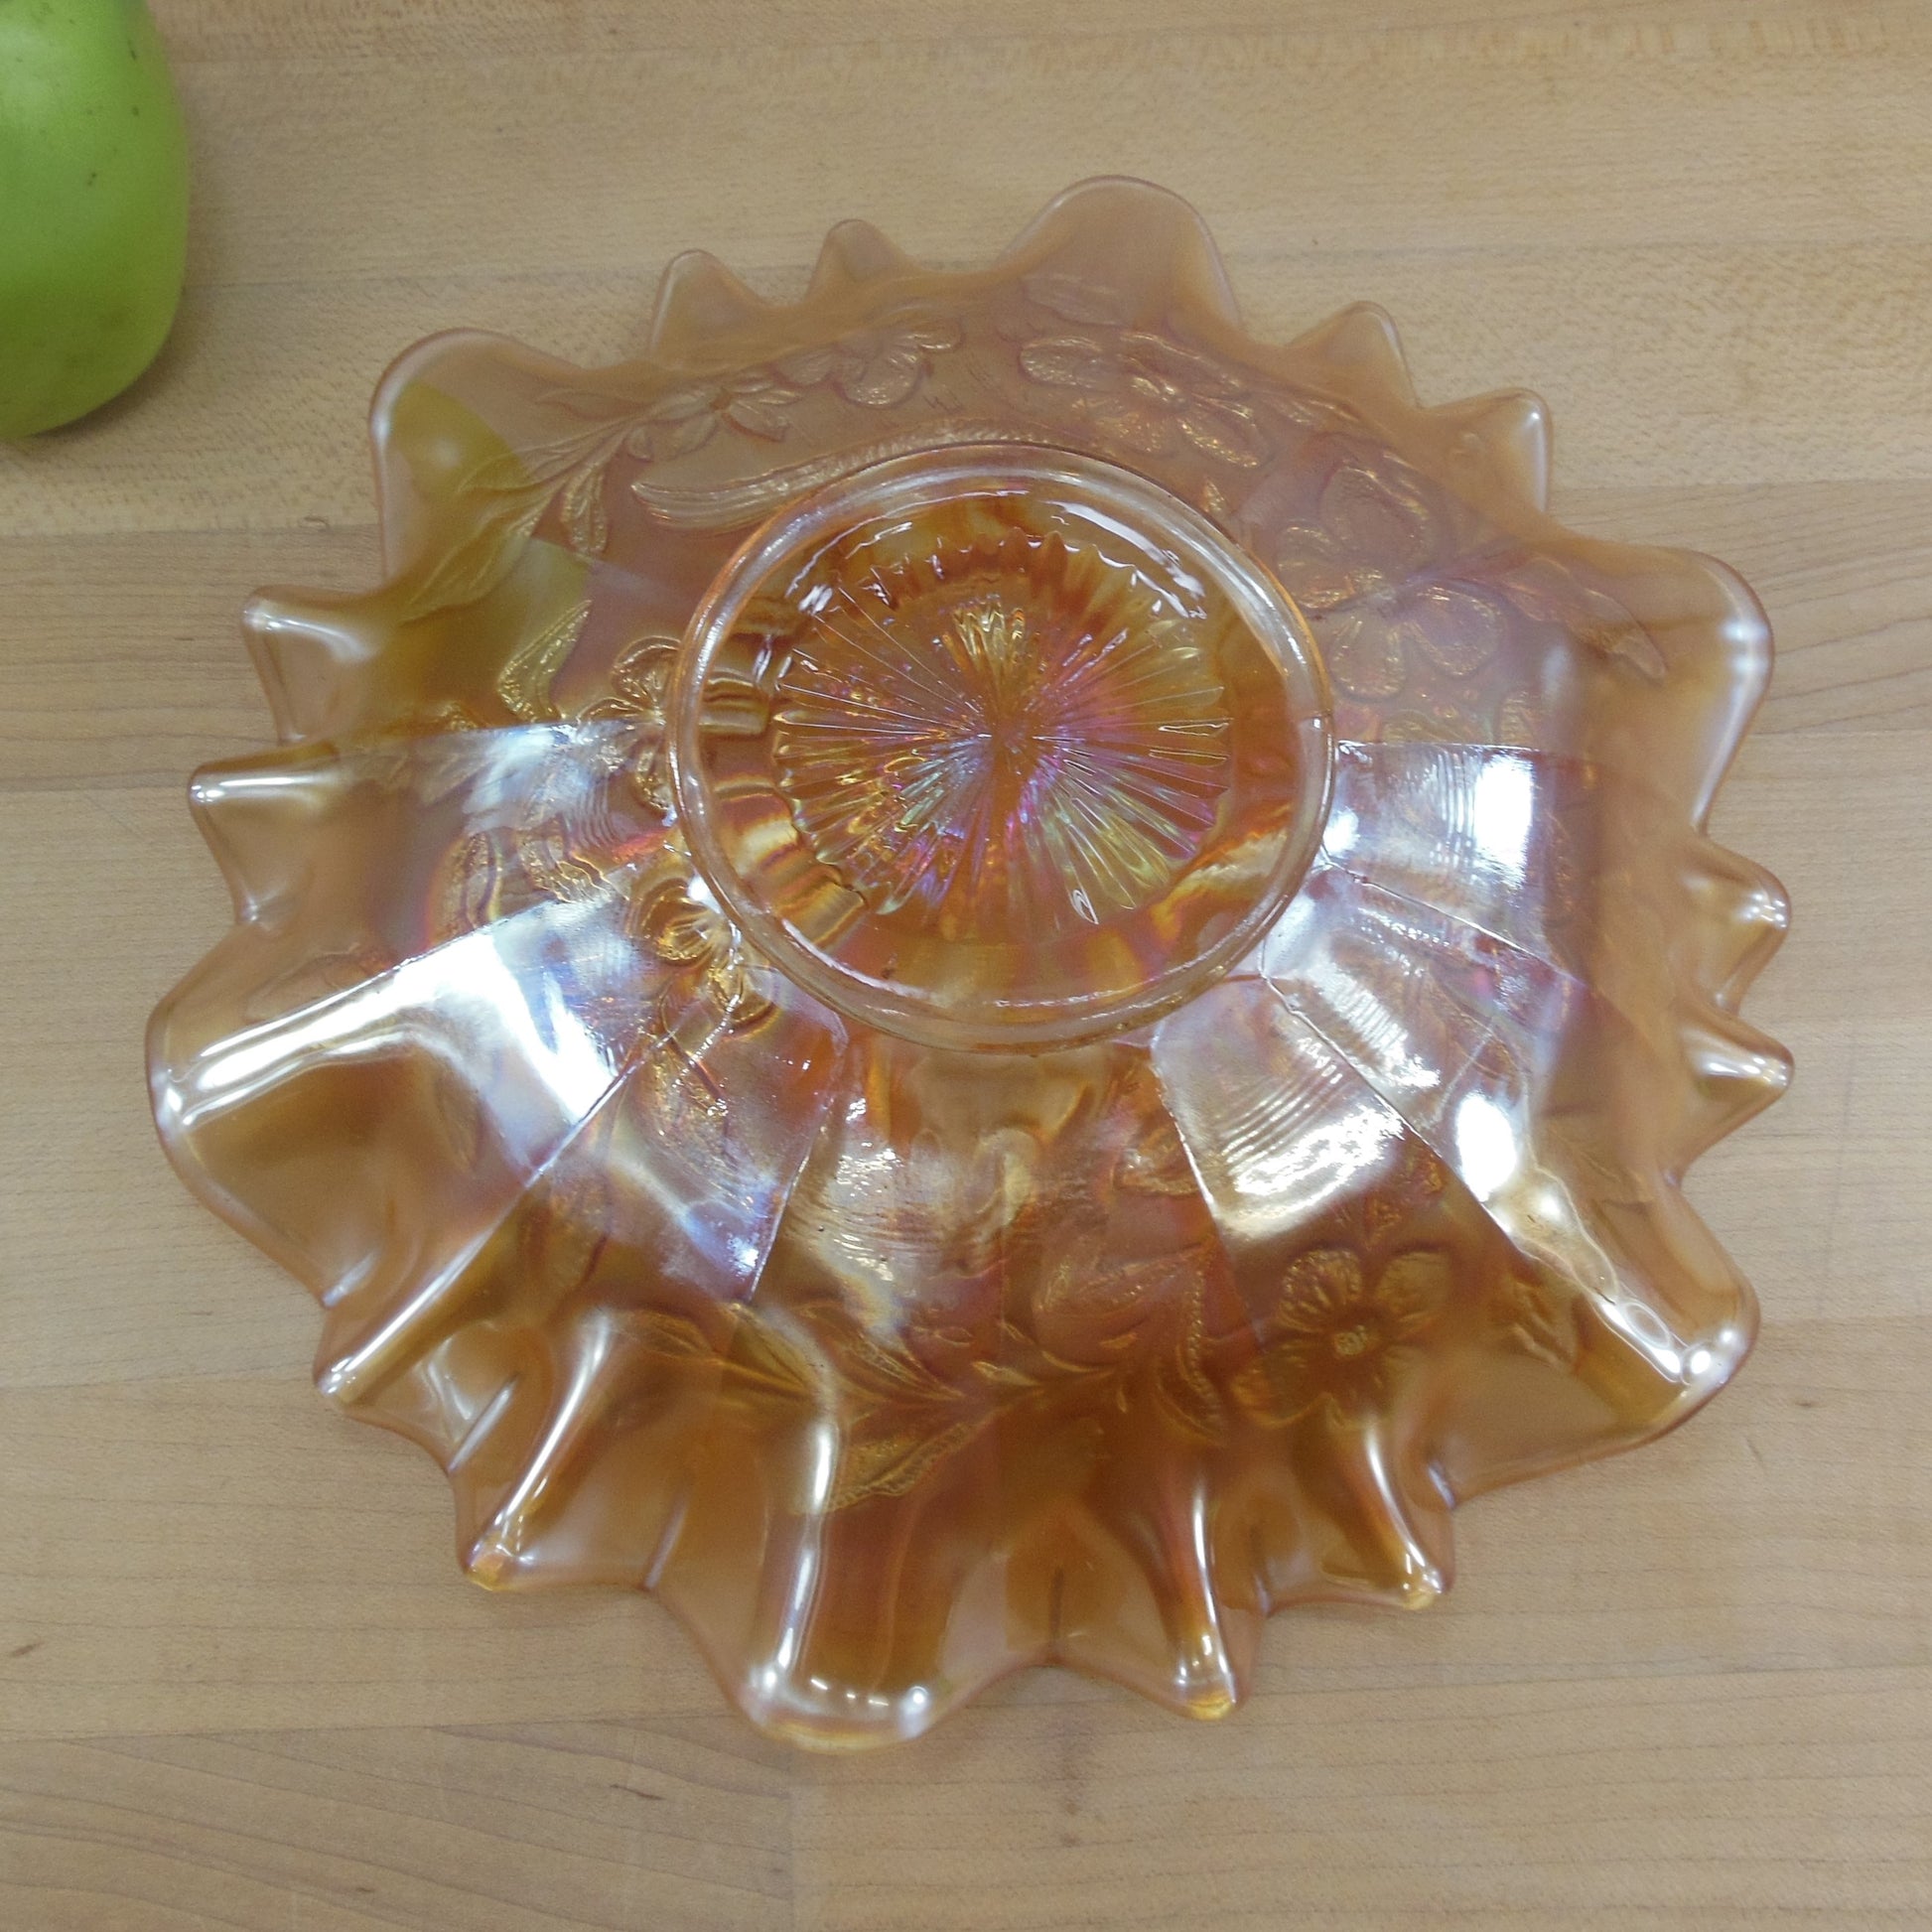 Millersburg Trout & Fly Marigold Carnival Glass Ruffled Bowl 3-1 antique